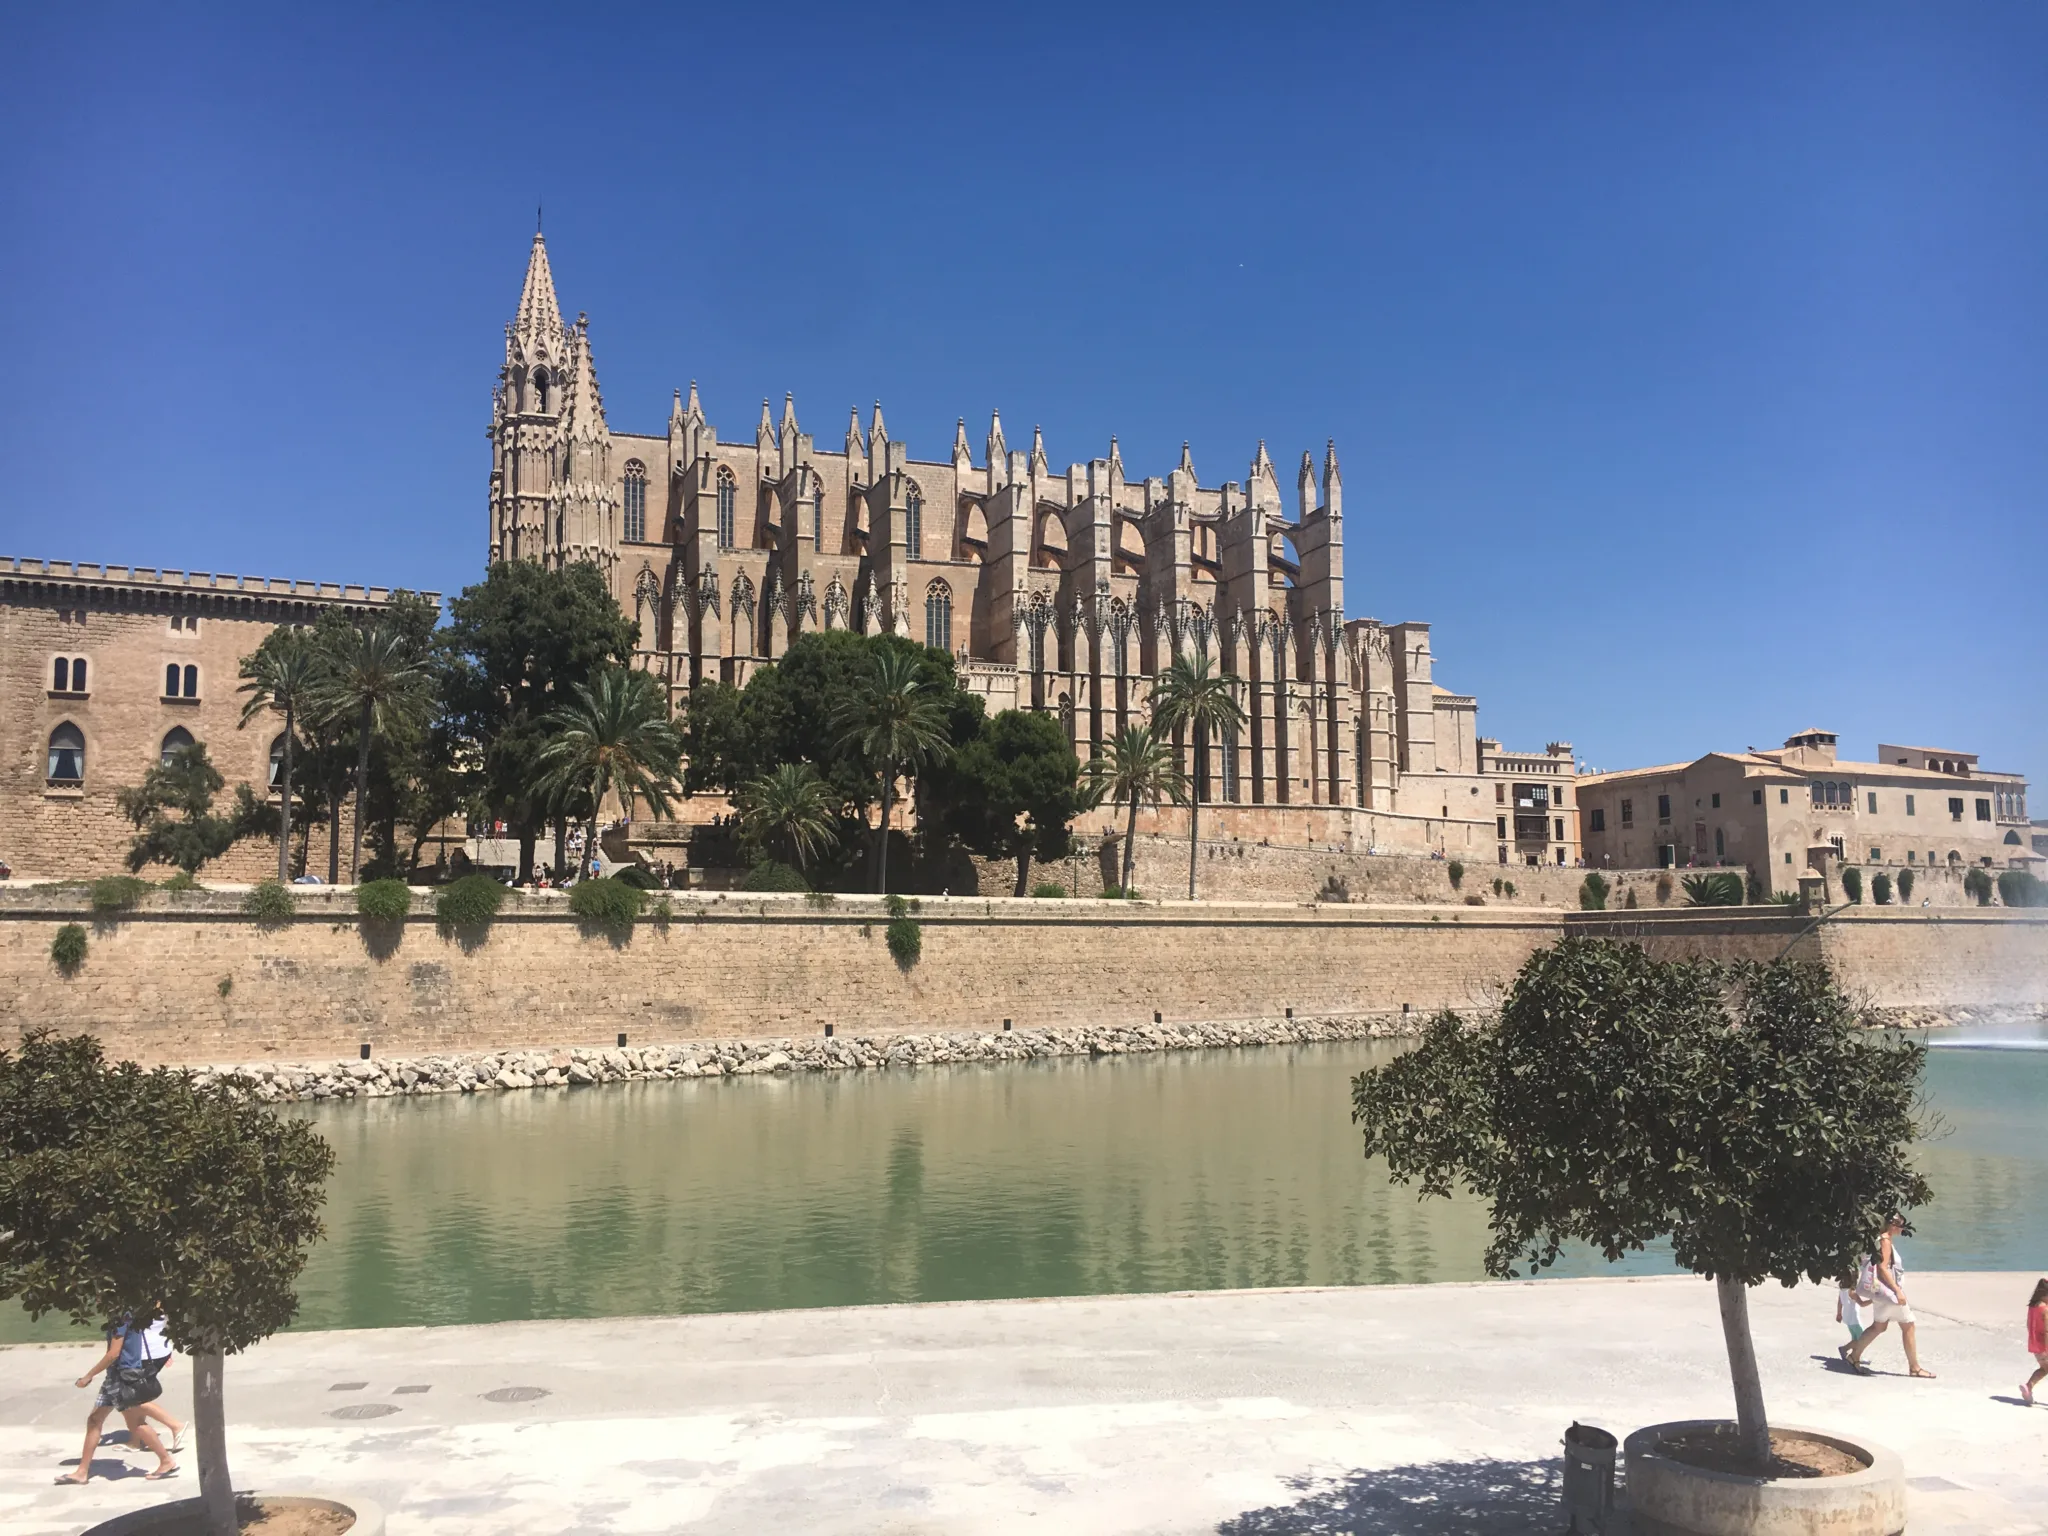 beautiful cathedral of palma de mallorca with some water in the foreground